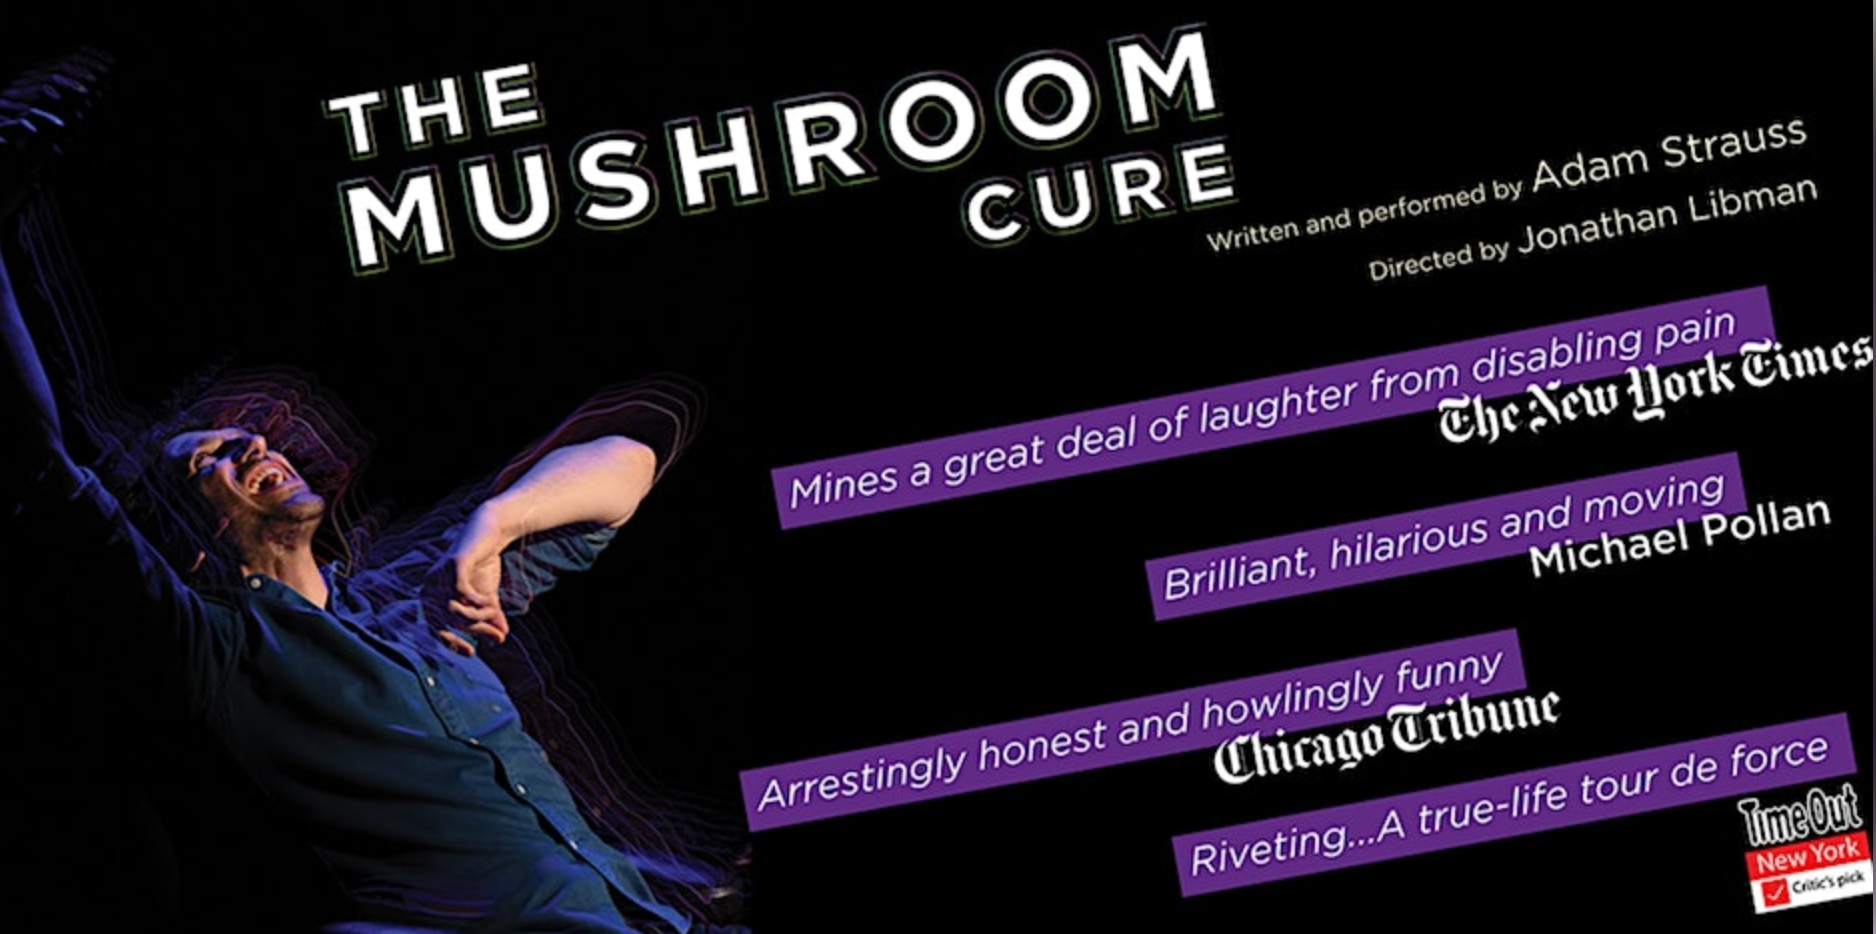 A poster for the mushroom cure shows a man dancing on a stage.